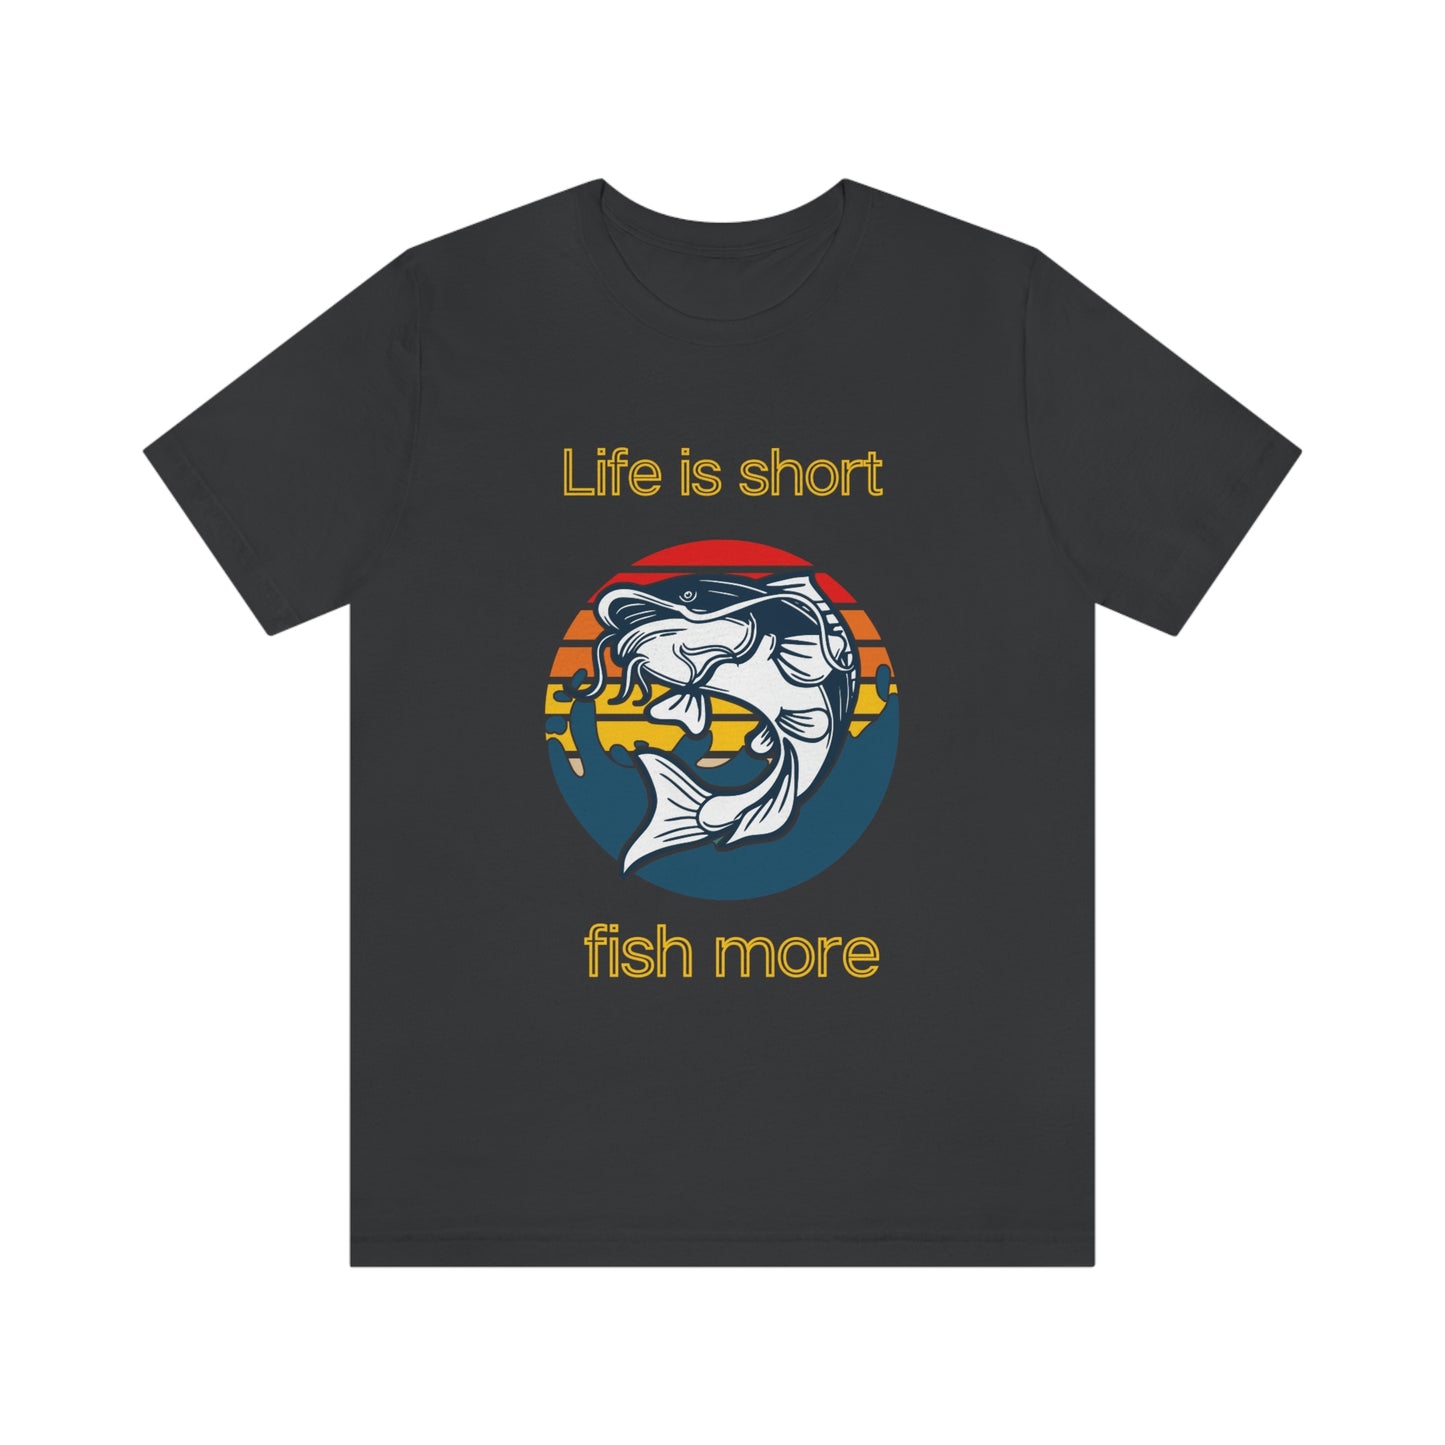 Fishing Style, Life is short, fish more,  Short Sleeve Tee